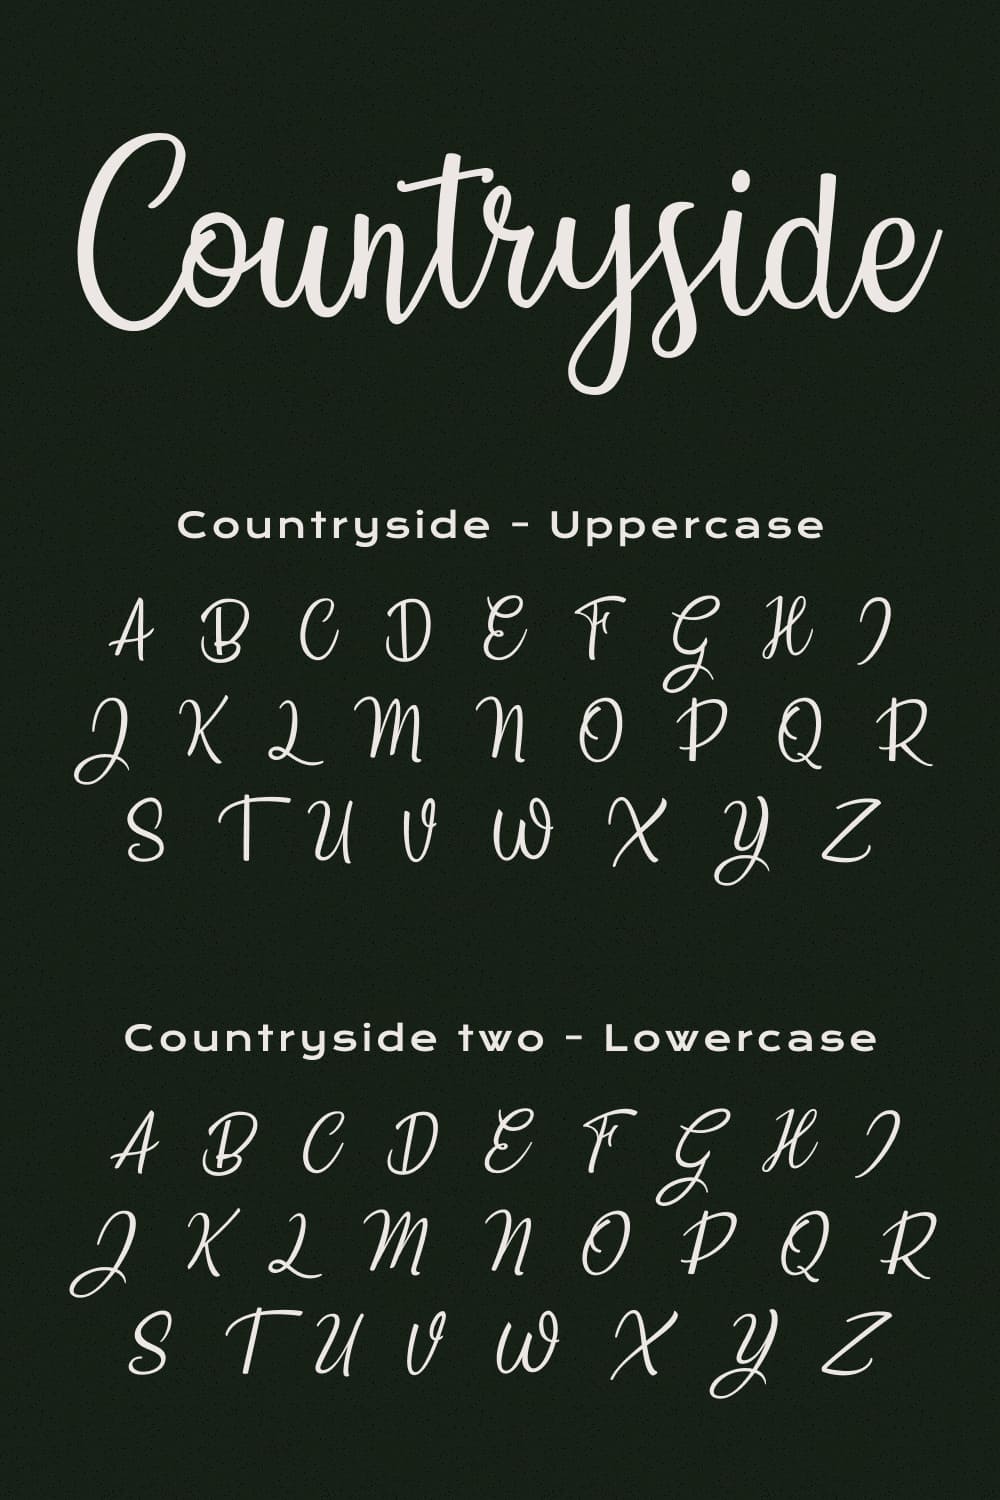 Using Countryside Free Farmhouse Font on a dark background.